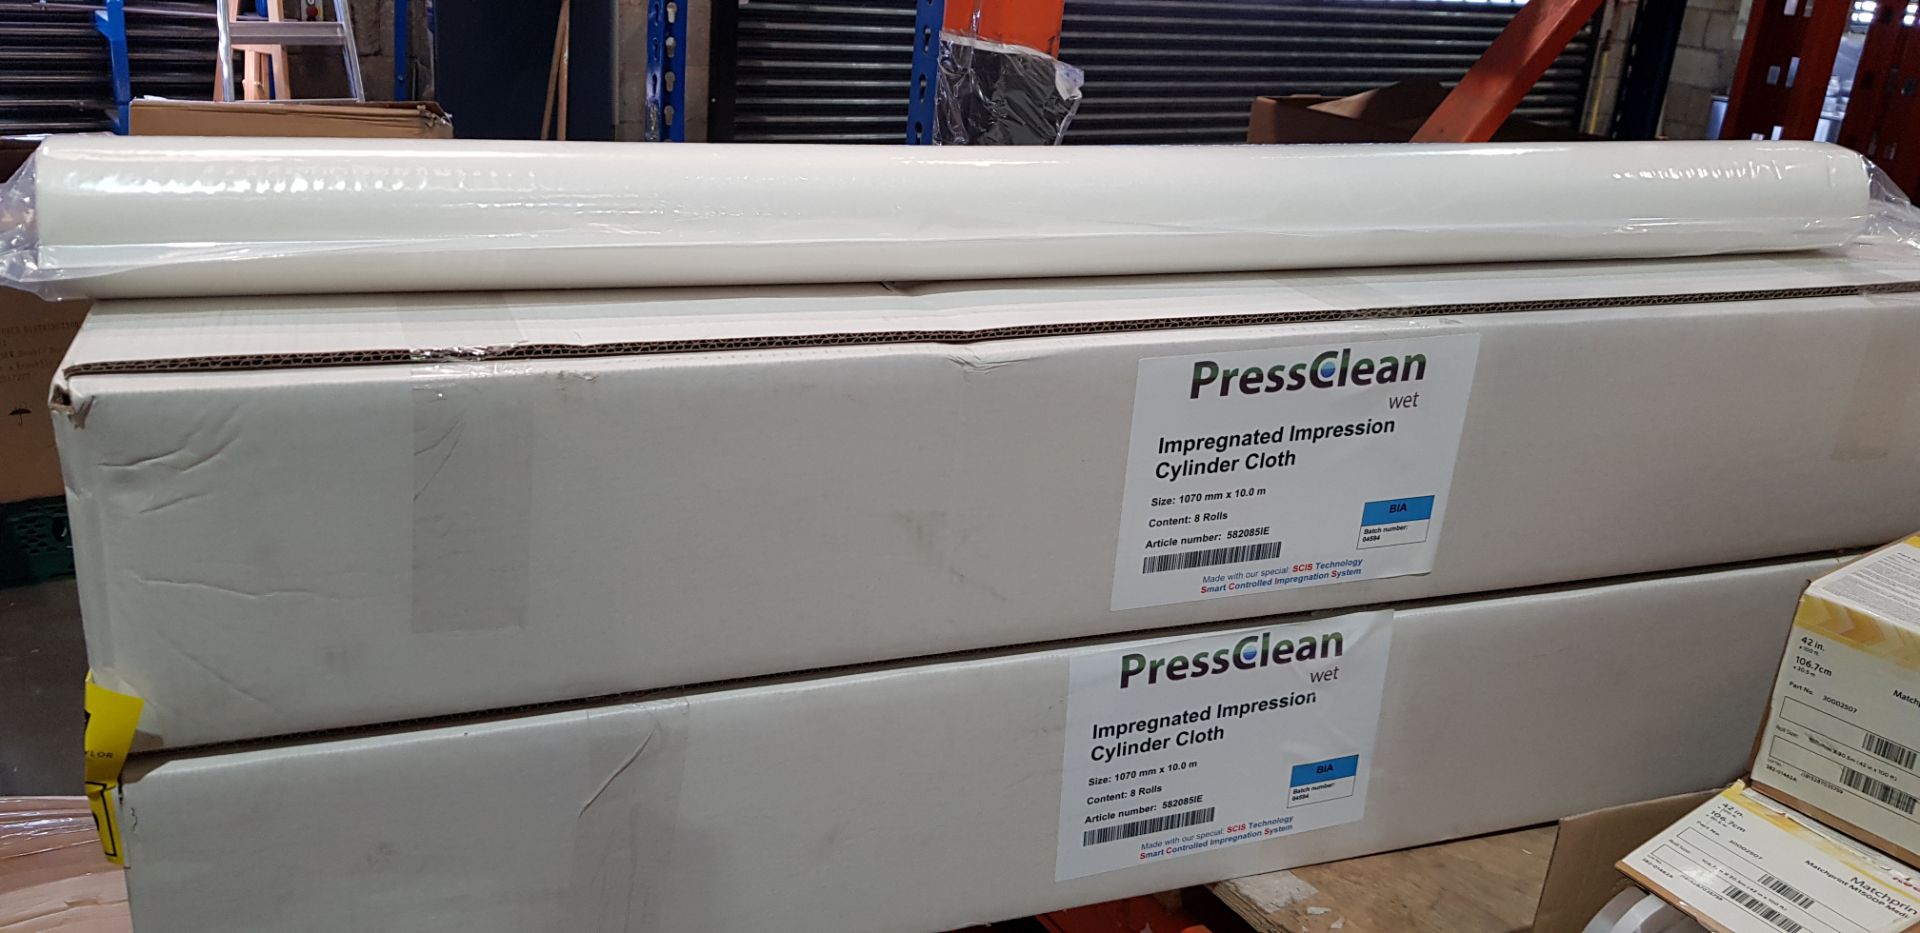 16 X BRAND NEW BOXED PRESS CLEAN IMPREGNATED IMPRESSION CYLINDER CLOTH - SIZE - 1070 MM X 10.0M - IN